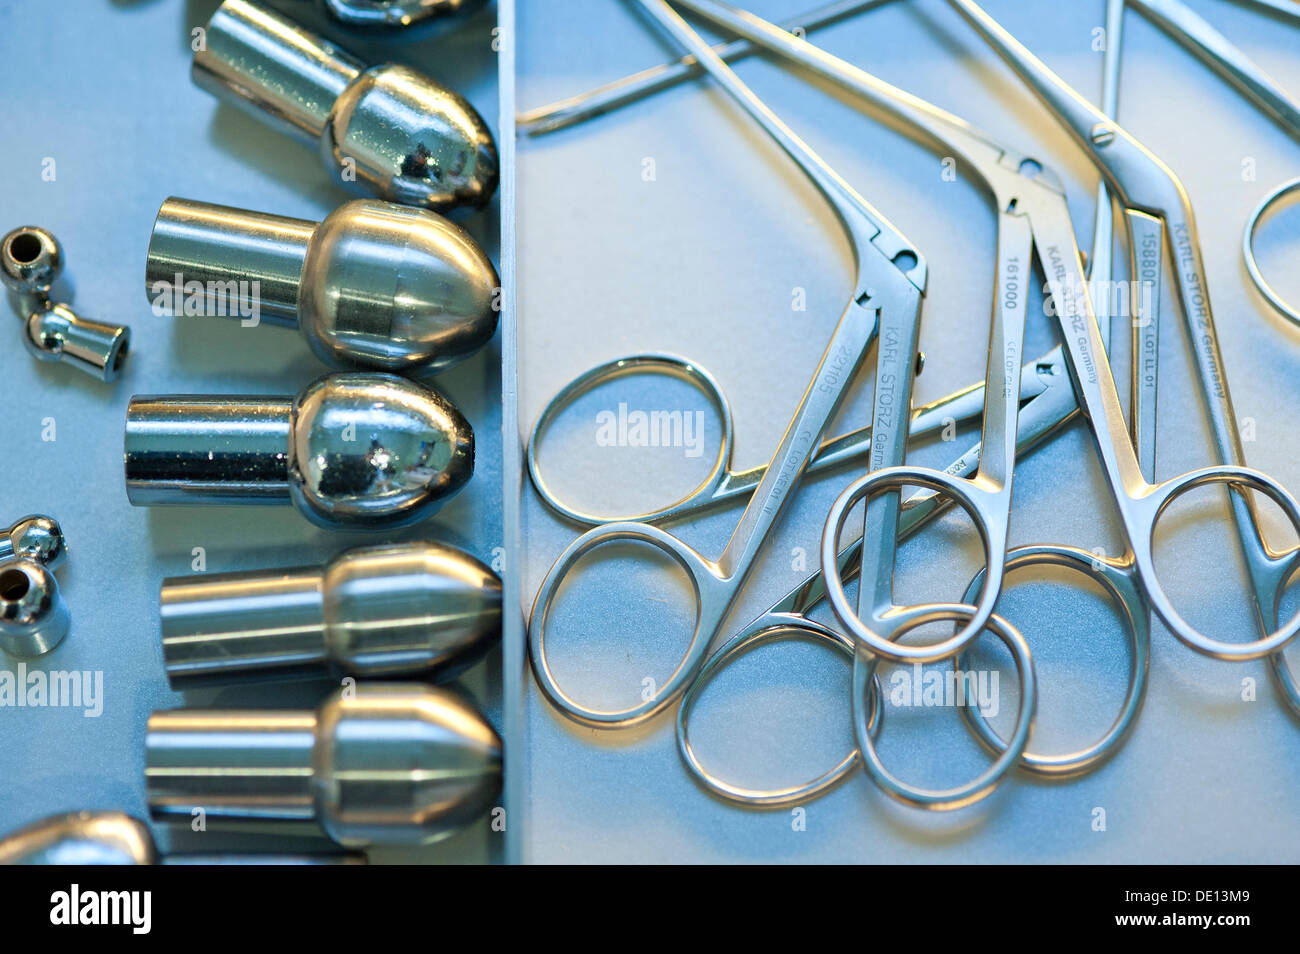 Ear, nose and throat specialist, medical or surgical instruments. Stock Photo